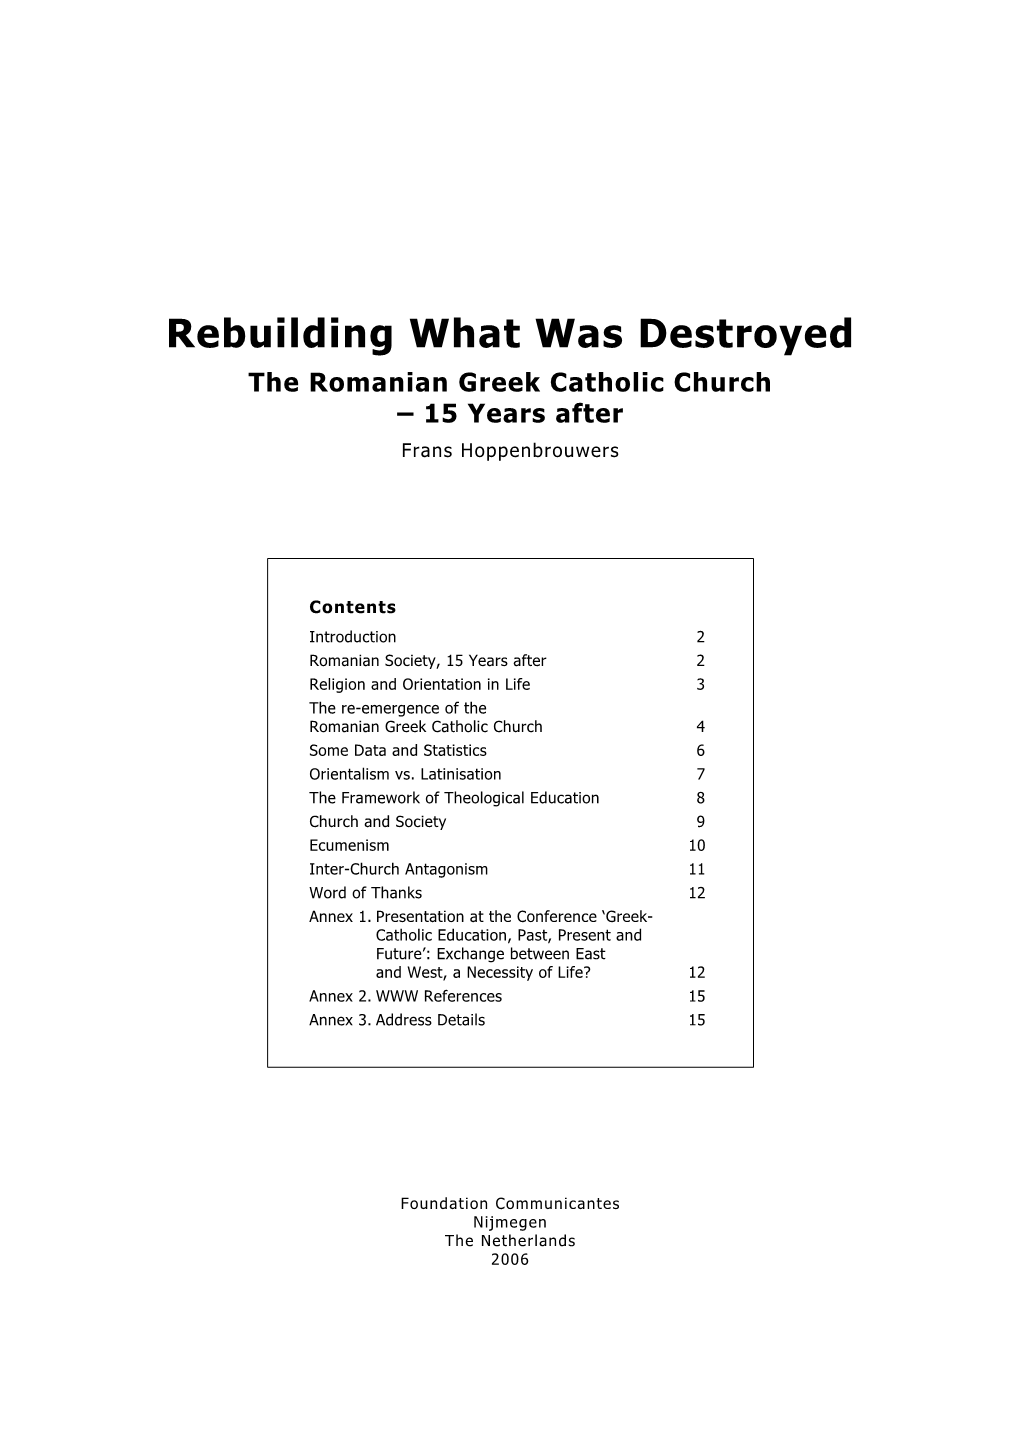 Rebuilding What Was Destroyed the Romanian Greek Catholic Church – 15 Years After Frans Hoppenbrouwers